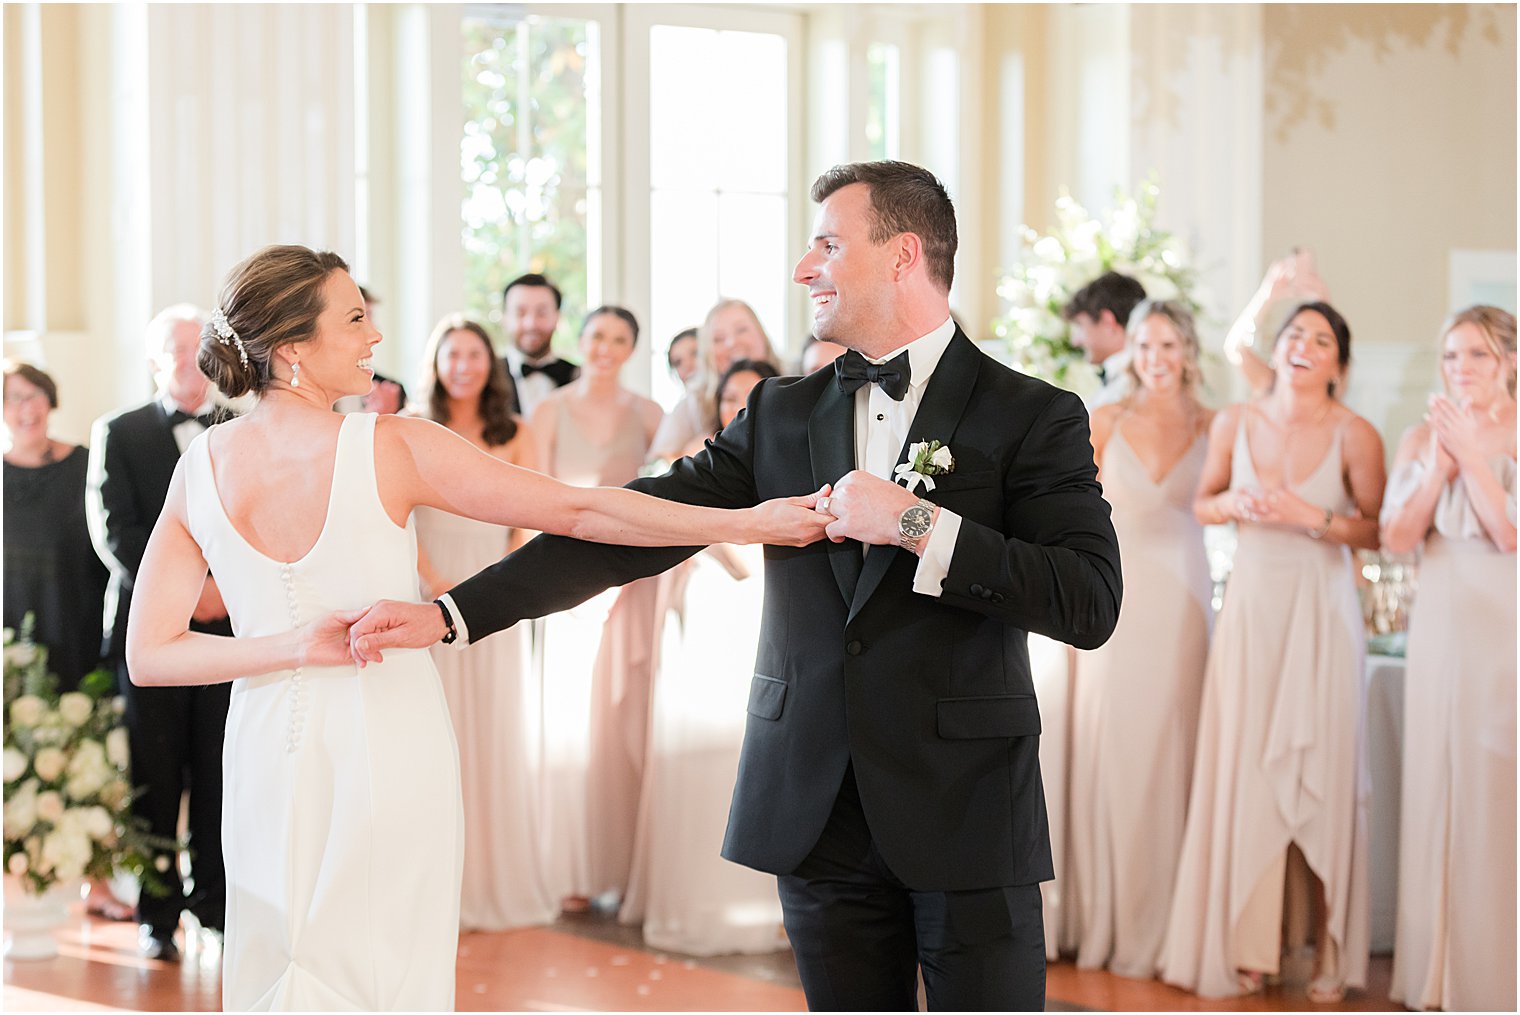 newlyweds have first dance at Whitehouse Station NJ wedding reception